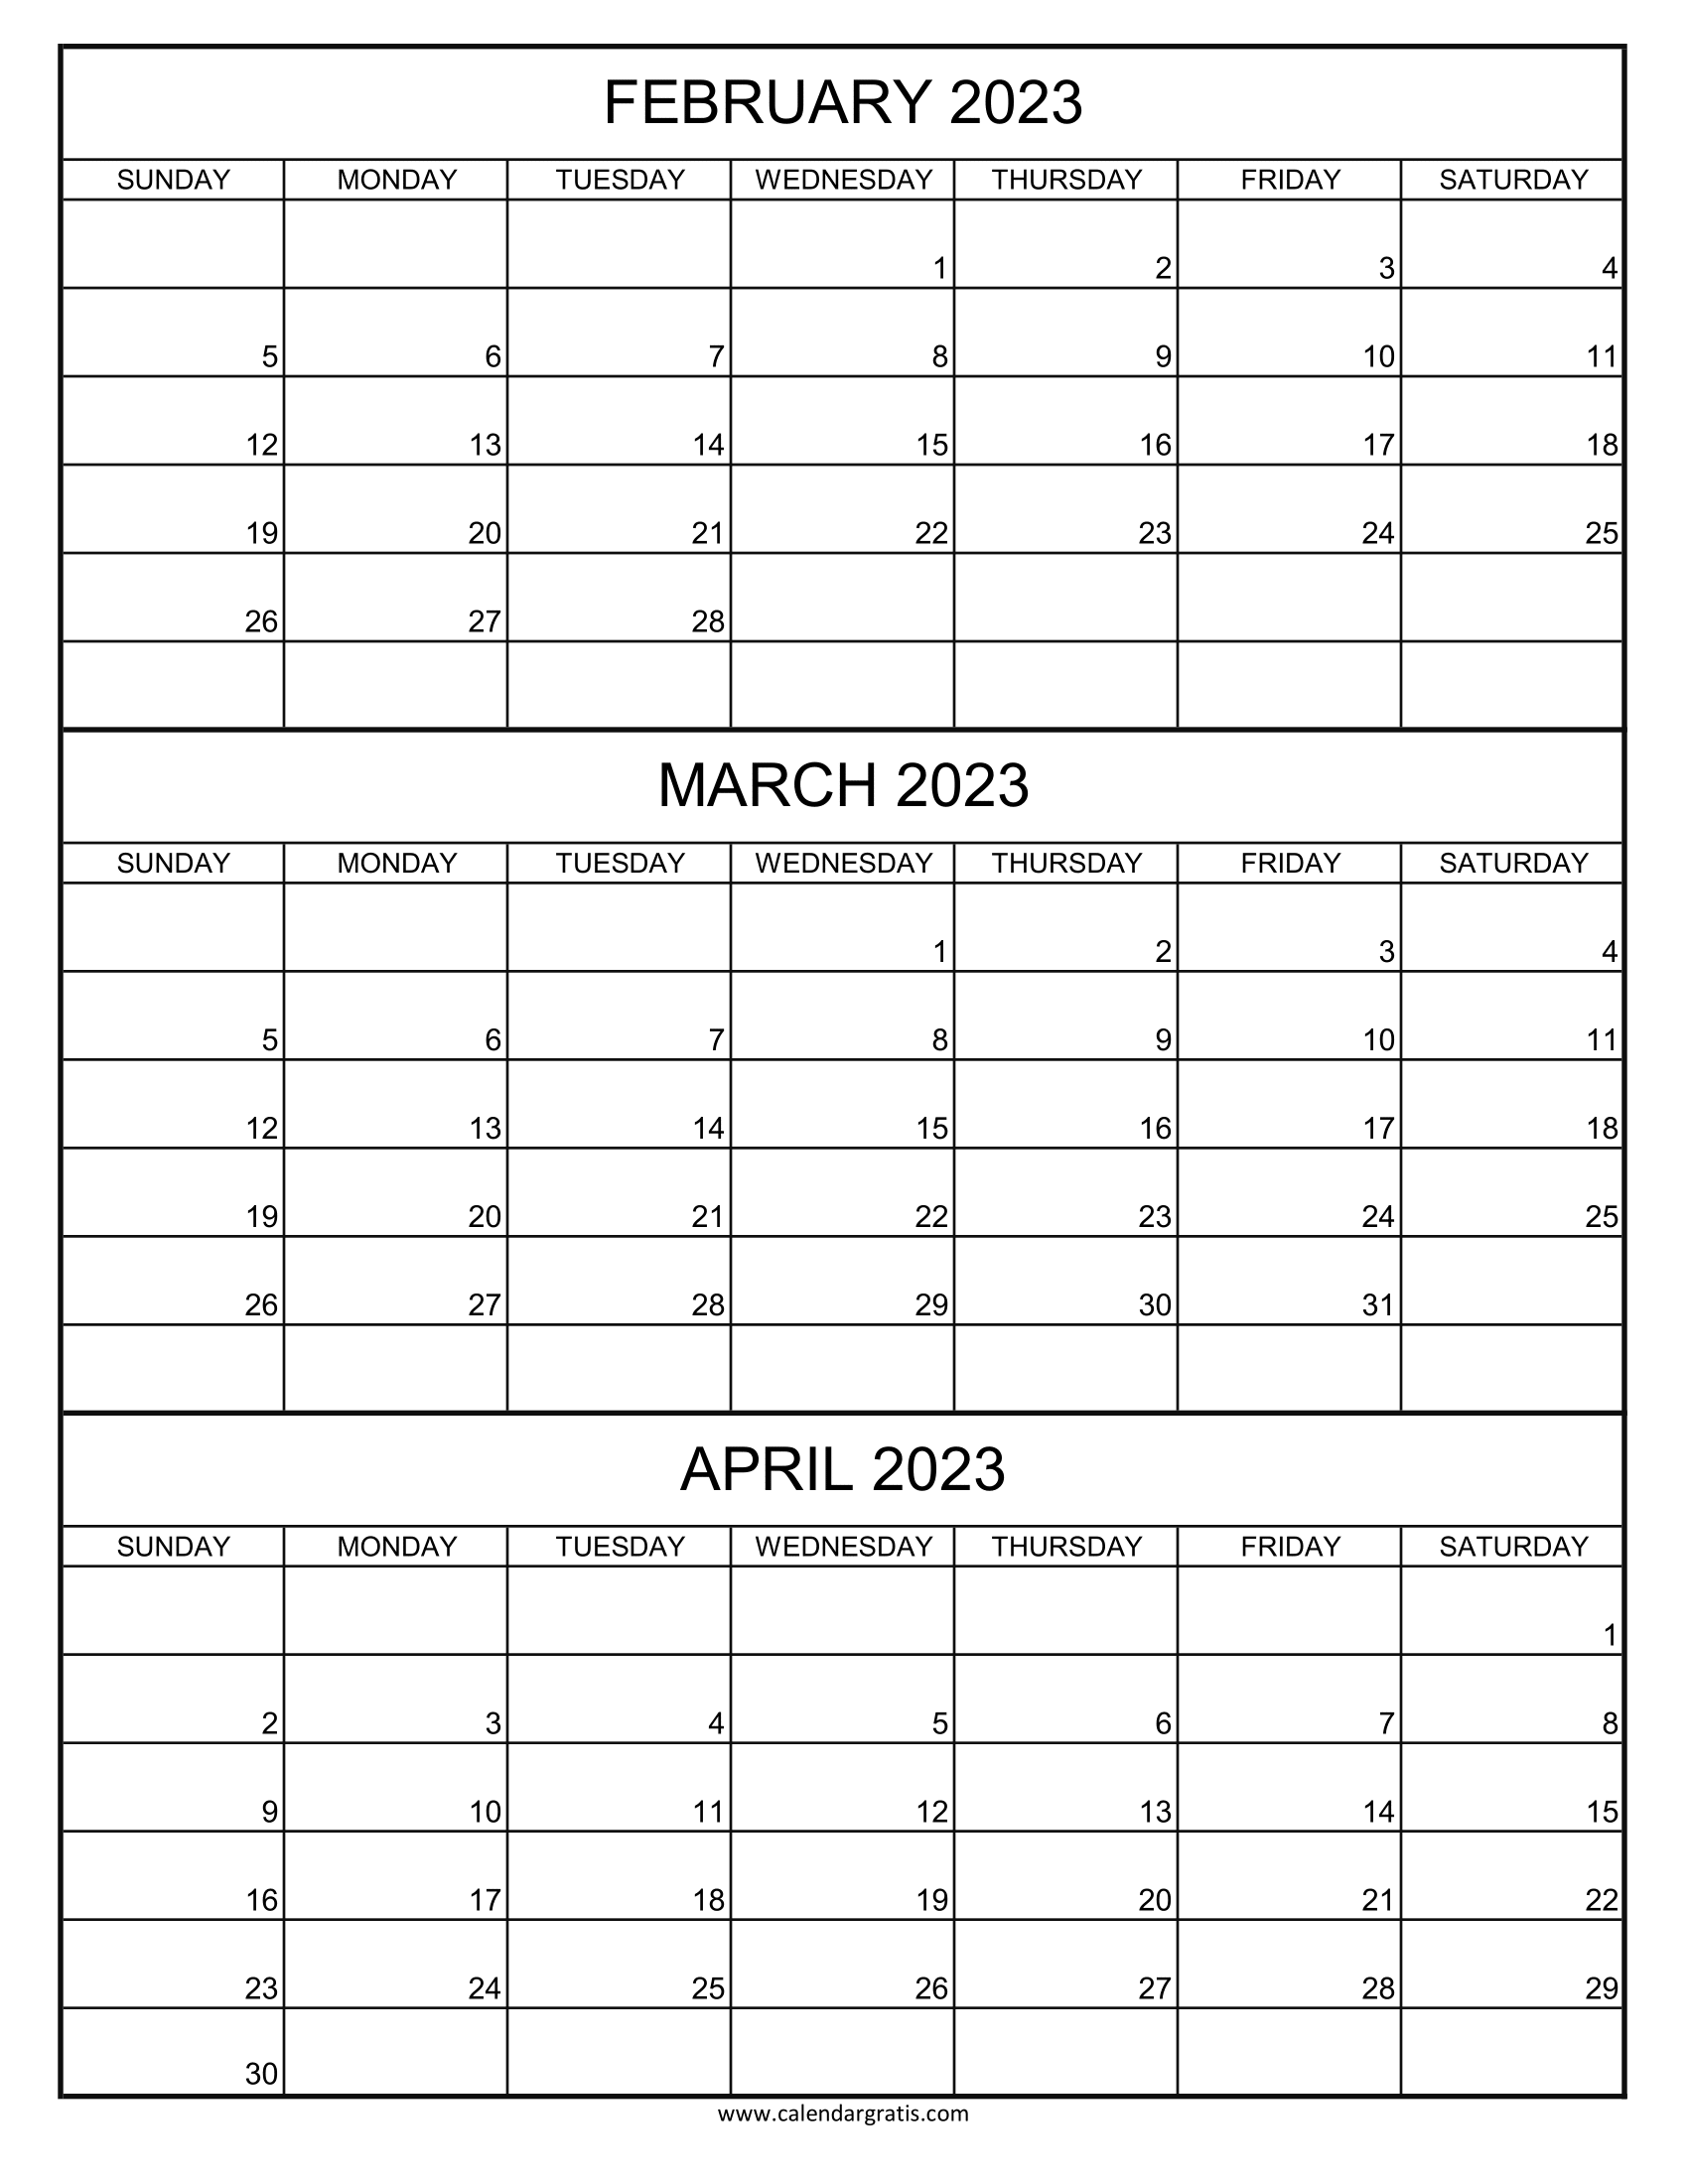 Three-month printable calendar February March April 2023 in Portrait Layout, vertical format, planner template.